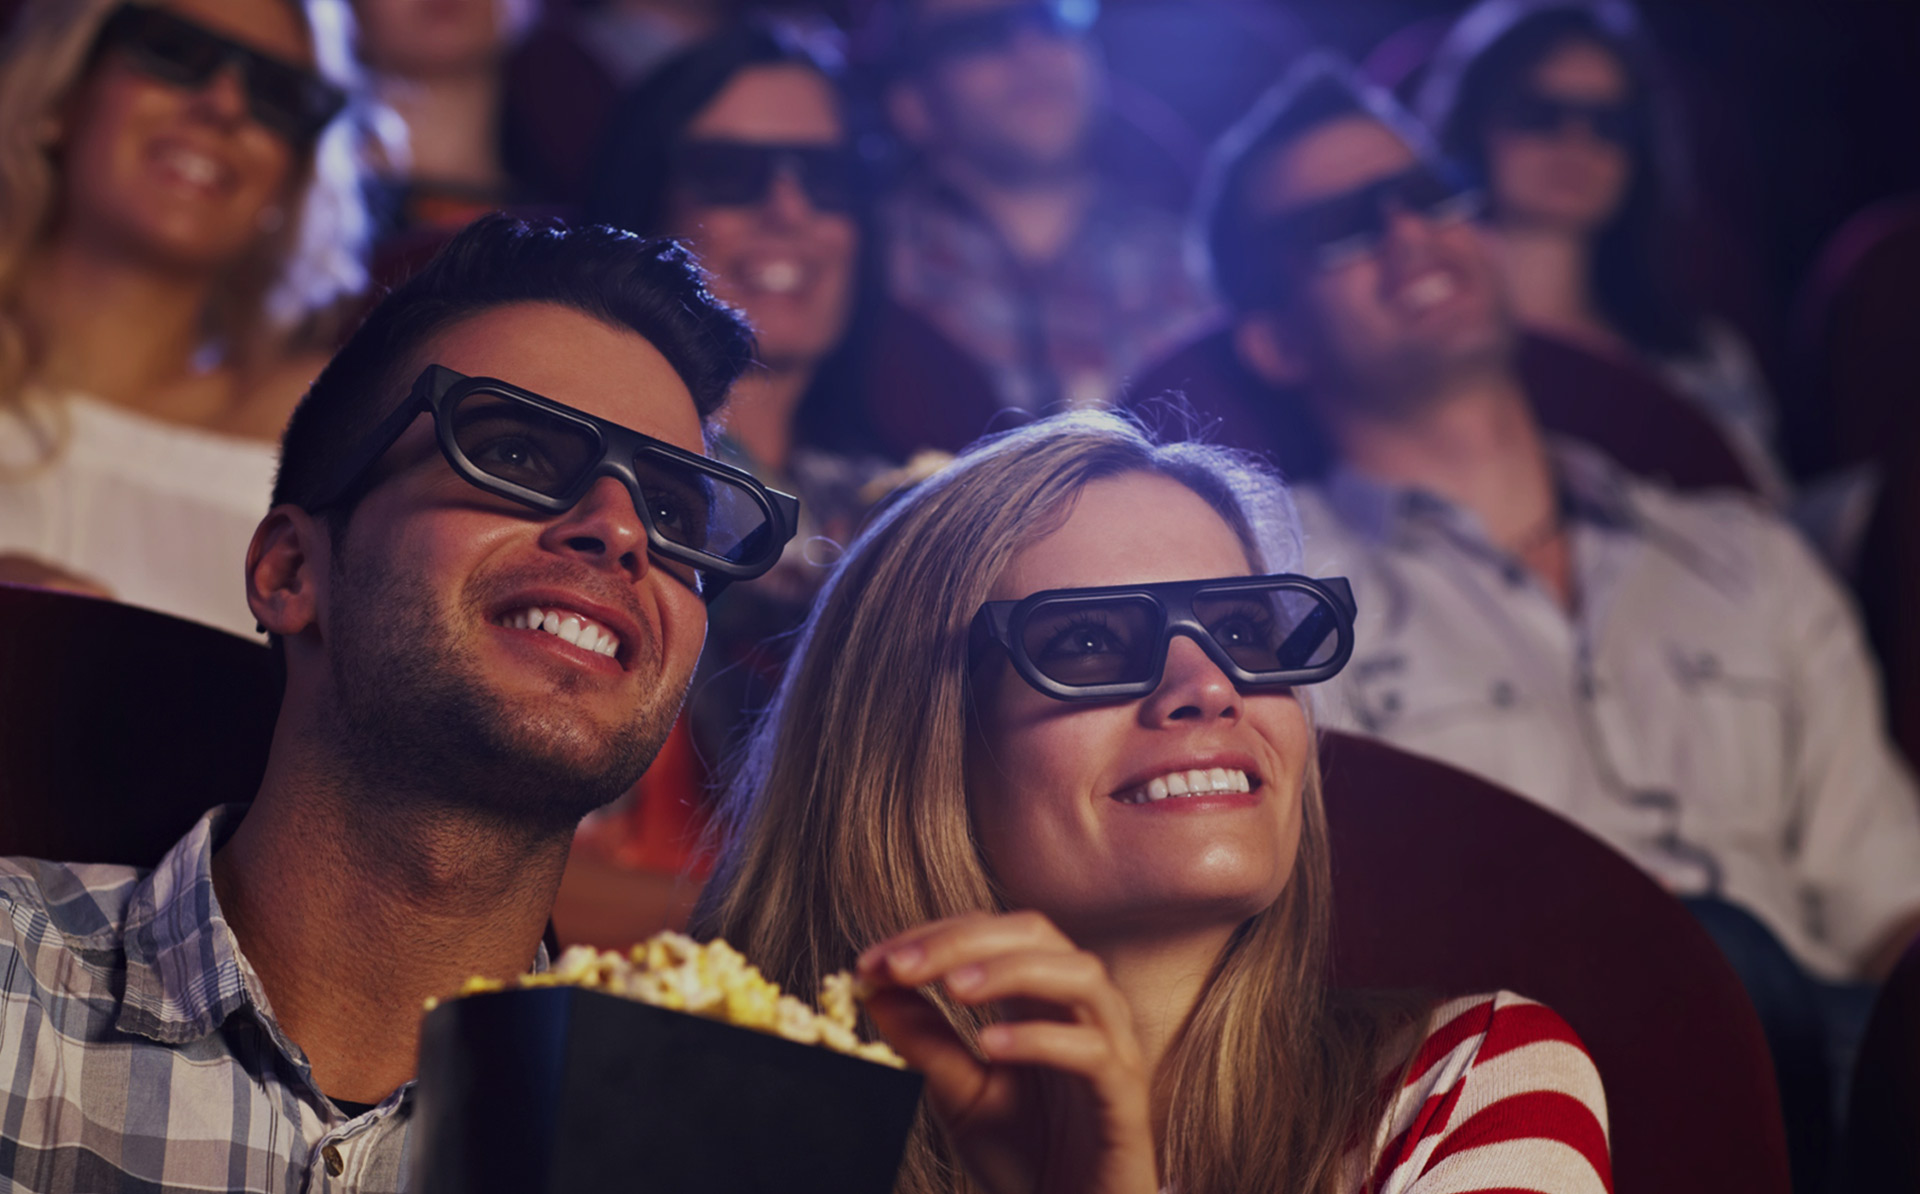 A man and woman at the cinema with 3D glasses enjoying popcorn.